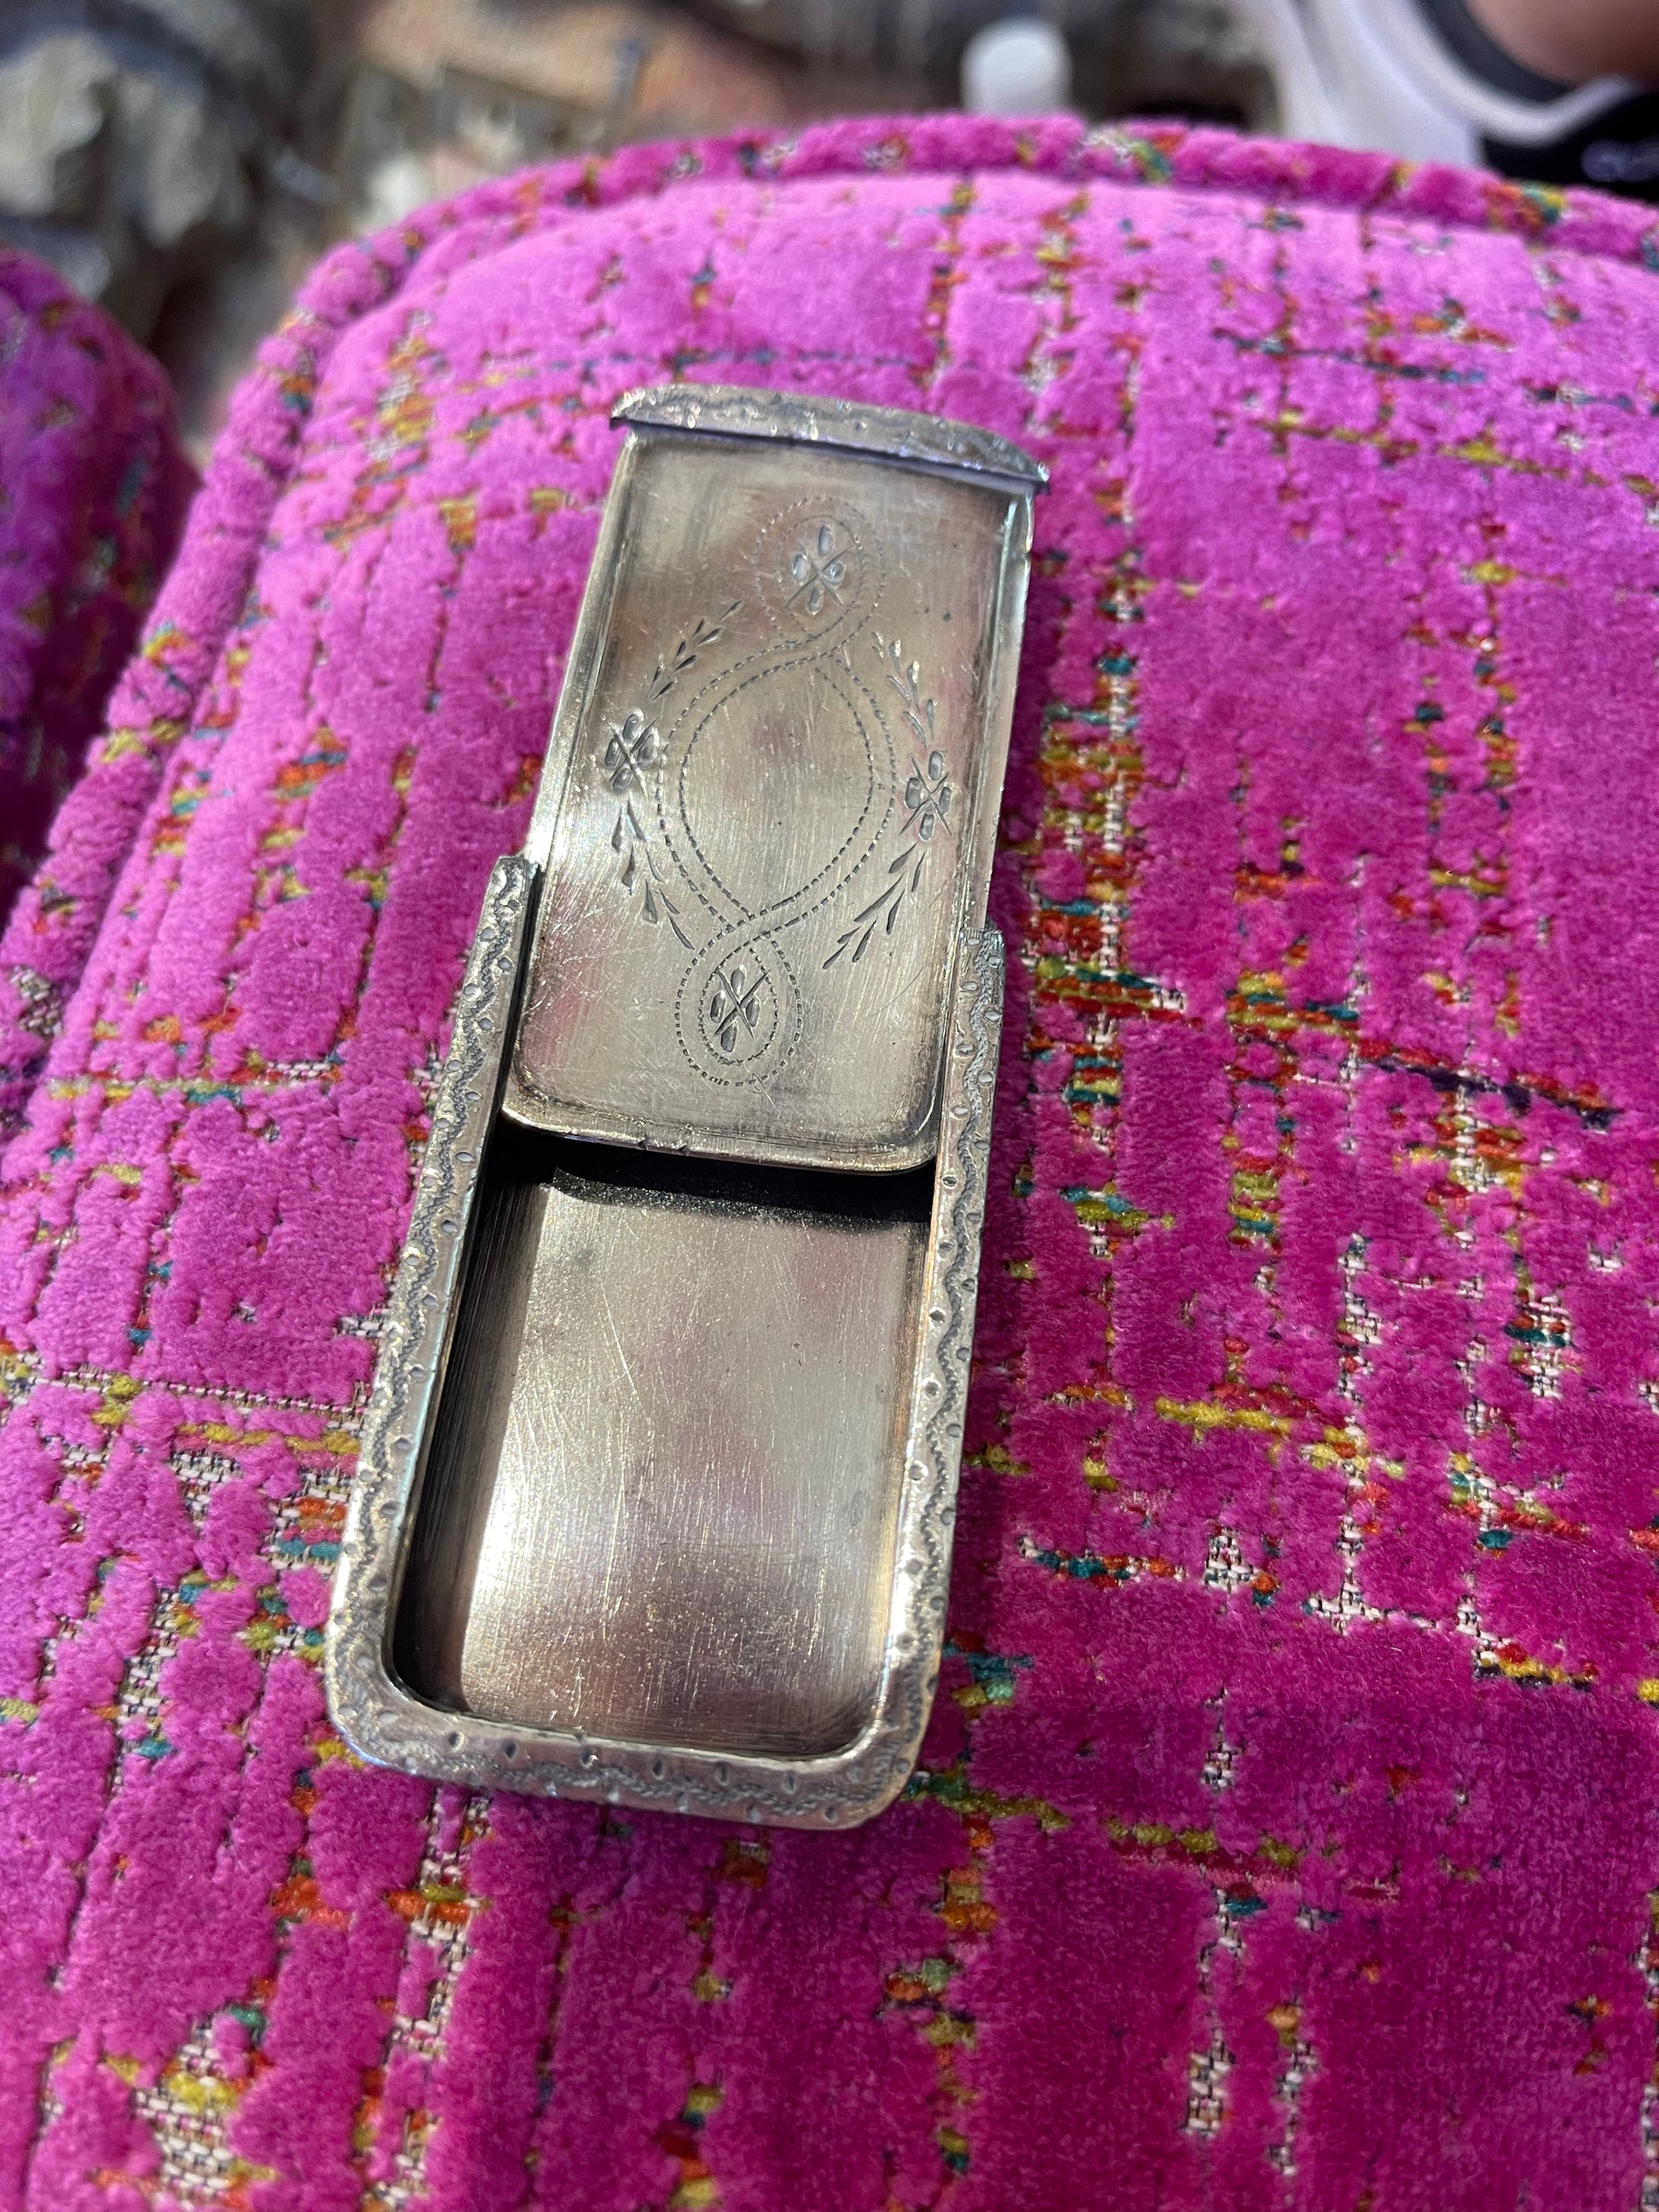 Silver Snuff Box with Sliding Lid - The White Barn Antiques